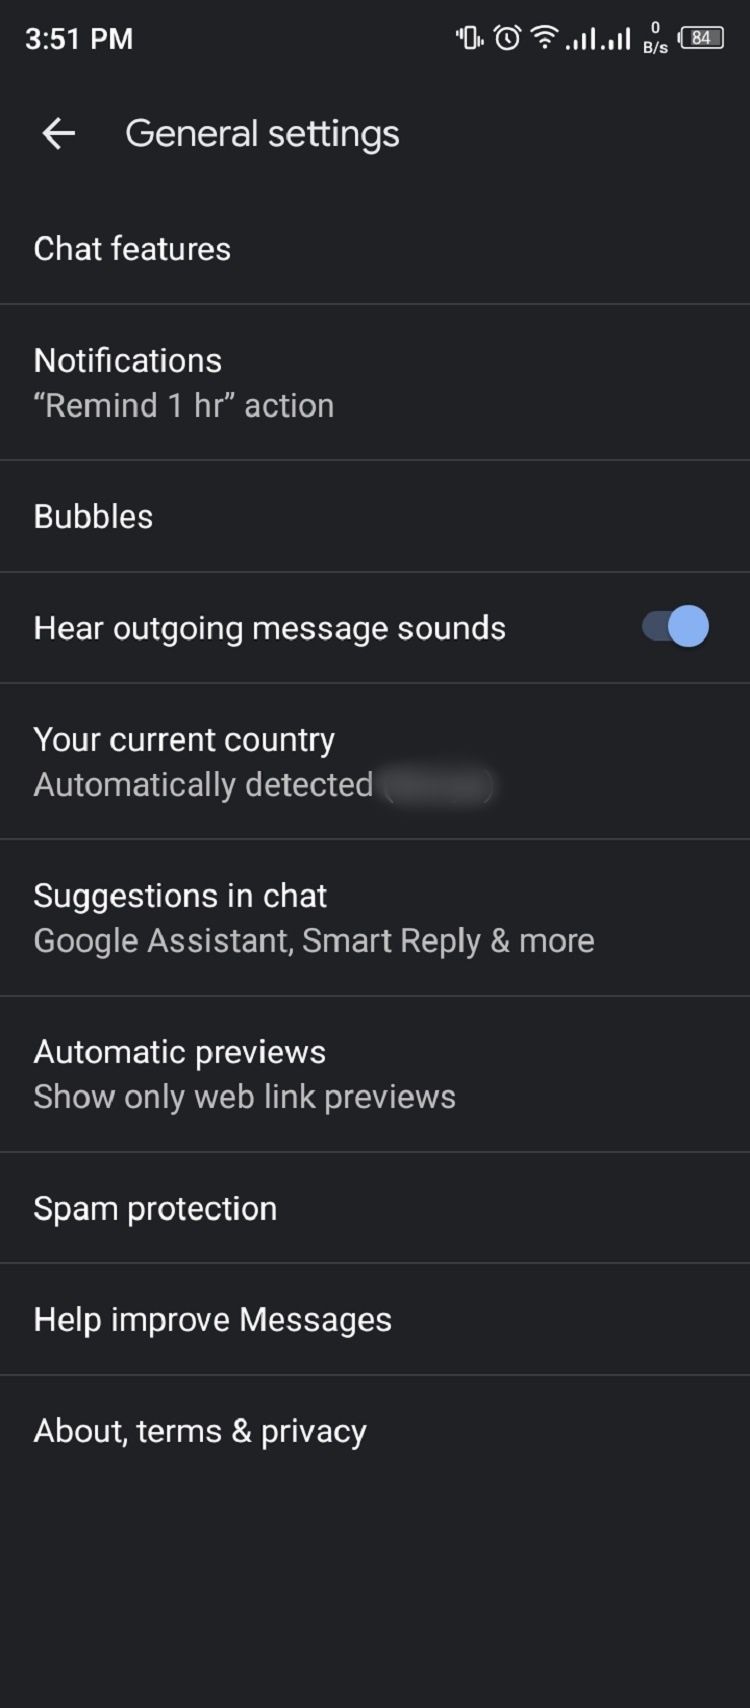 Android messages app general settings